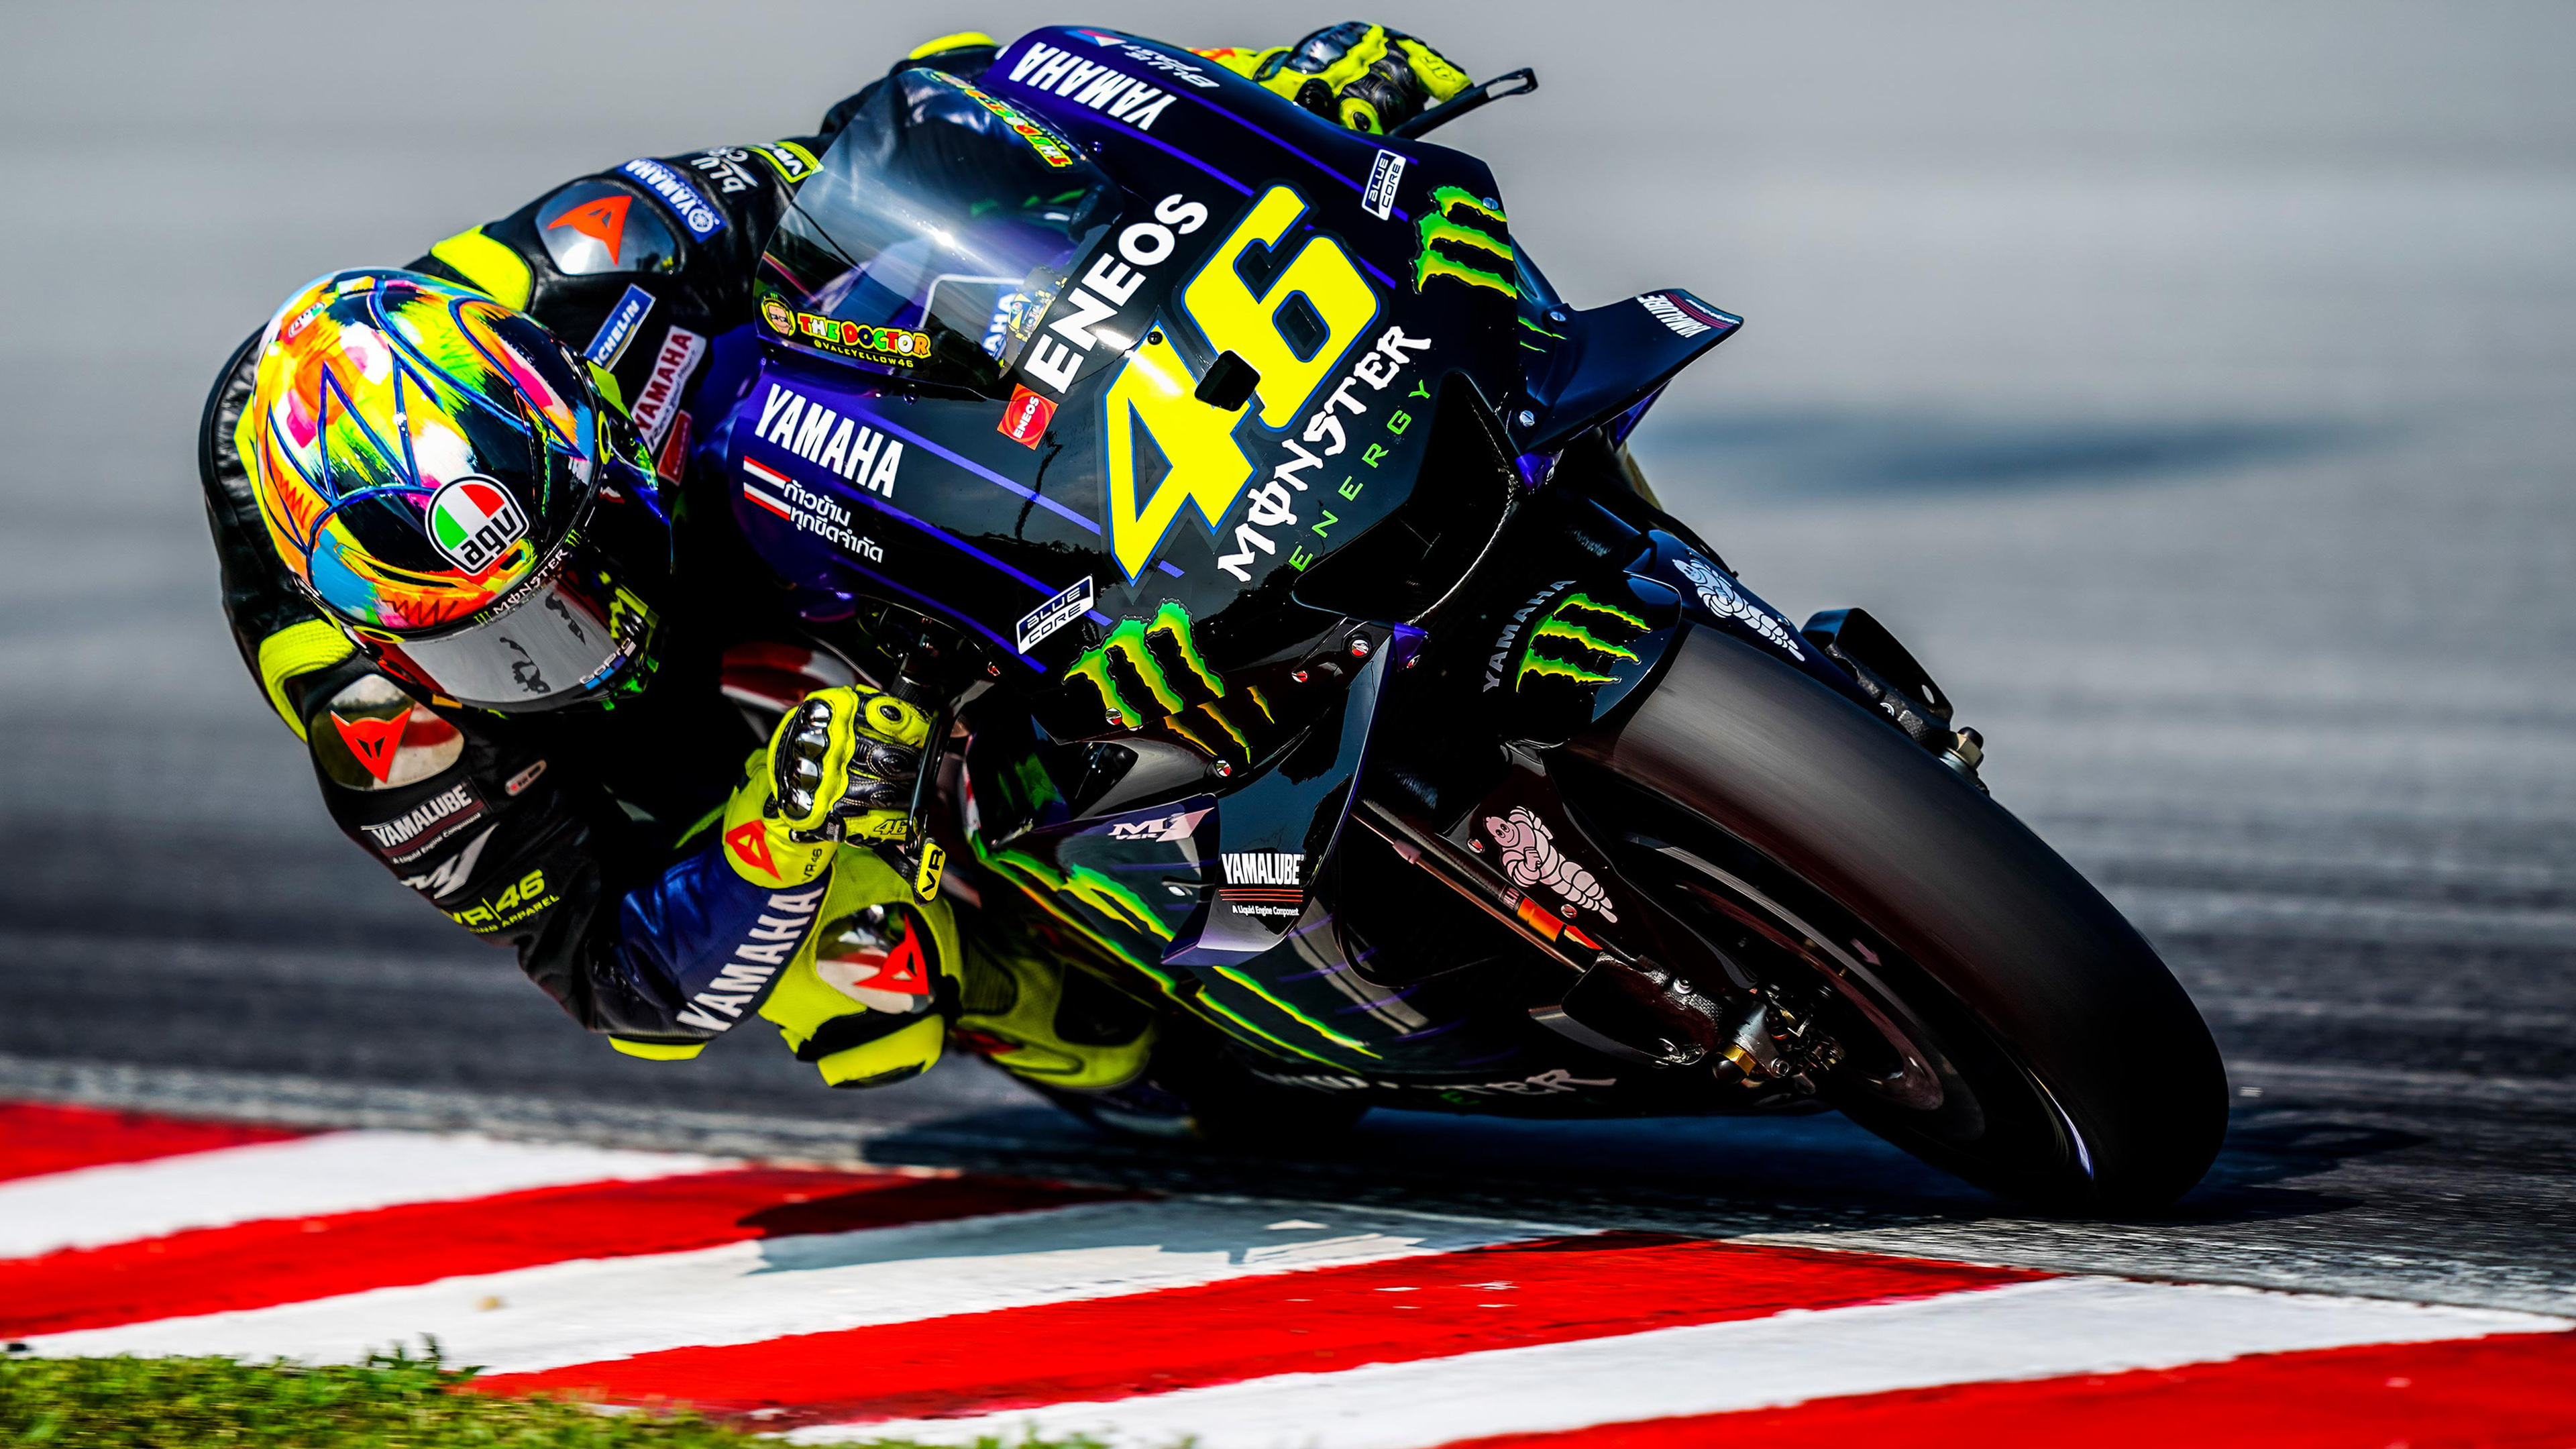 Motorcycle Racing: Yamaha, Valentino Rossi, Also Known as "The Doctor", Nine-time Grand Prix MRW Champion. 3840x2160 4K Wallpaper.